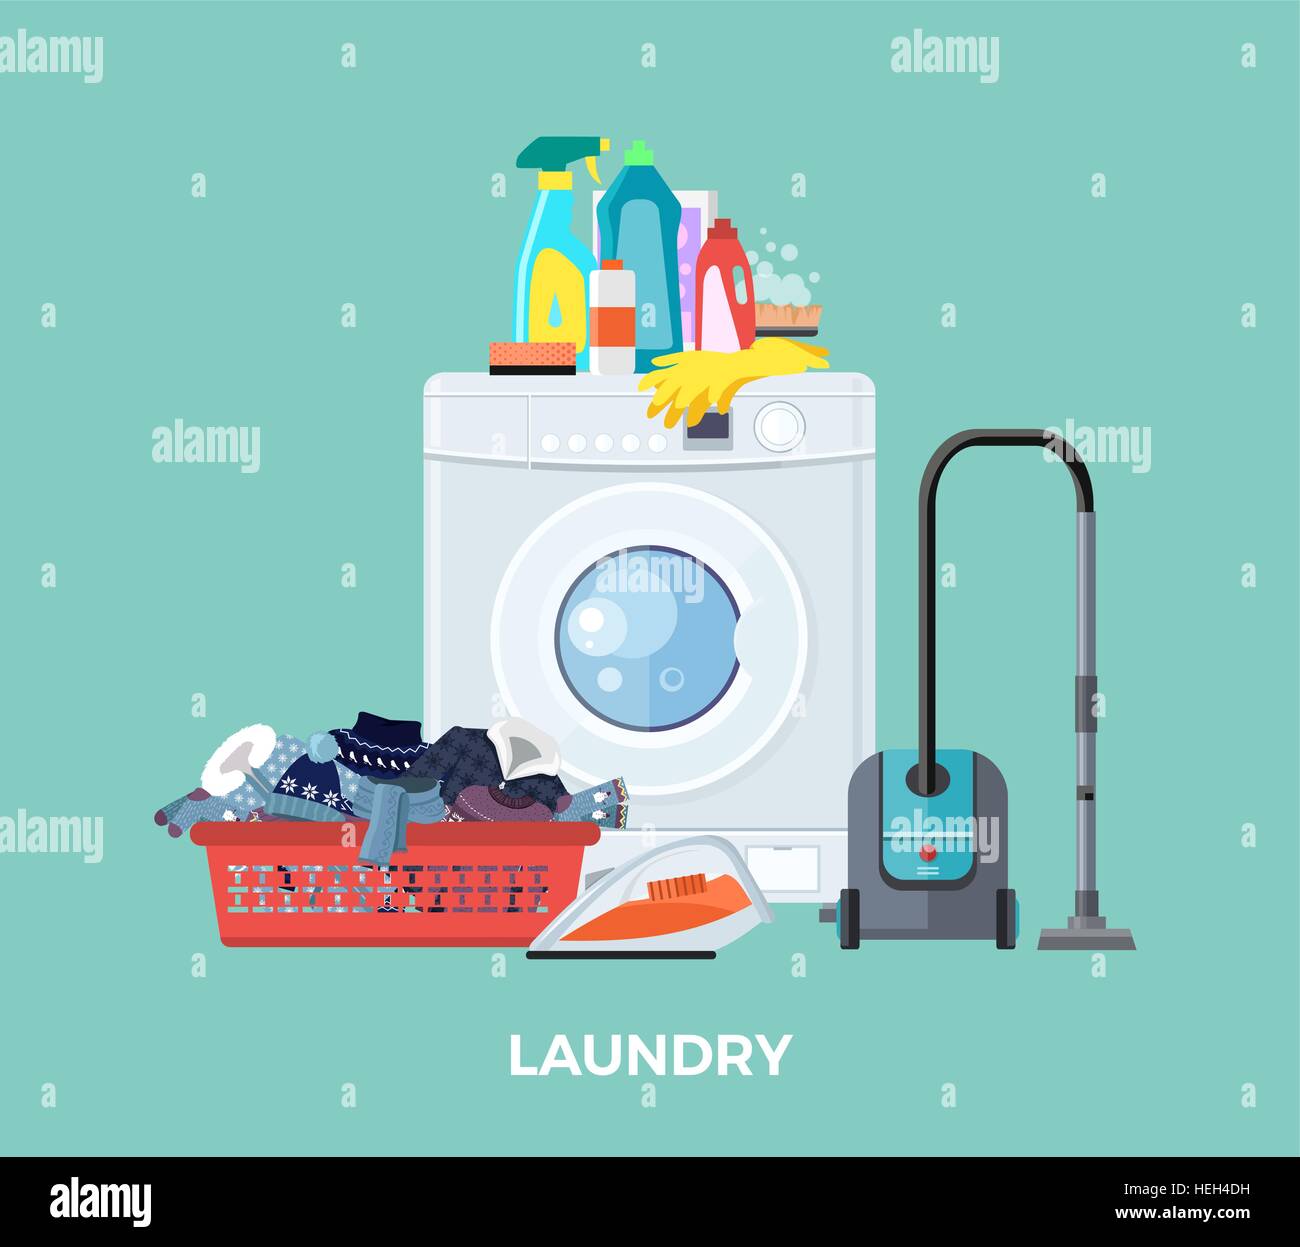 Laundry washing machine, vacuum and detergents. Laundry and laundry basket, washing machine, washing and laundry service, Stock Vector